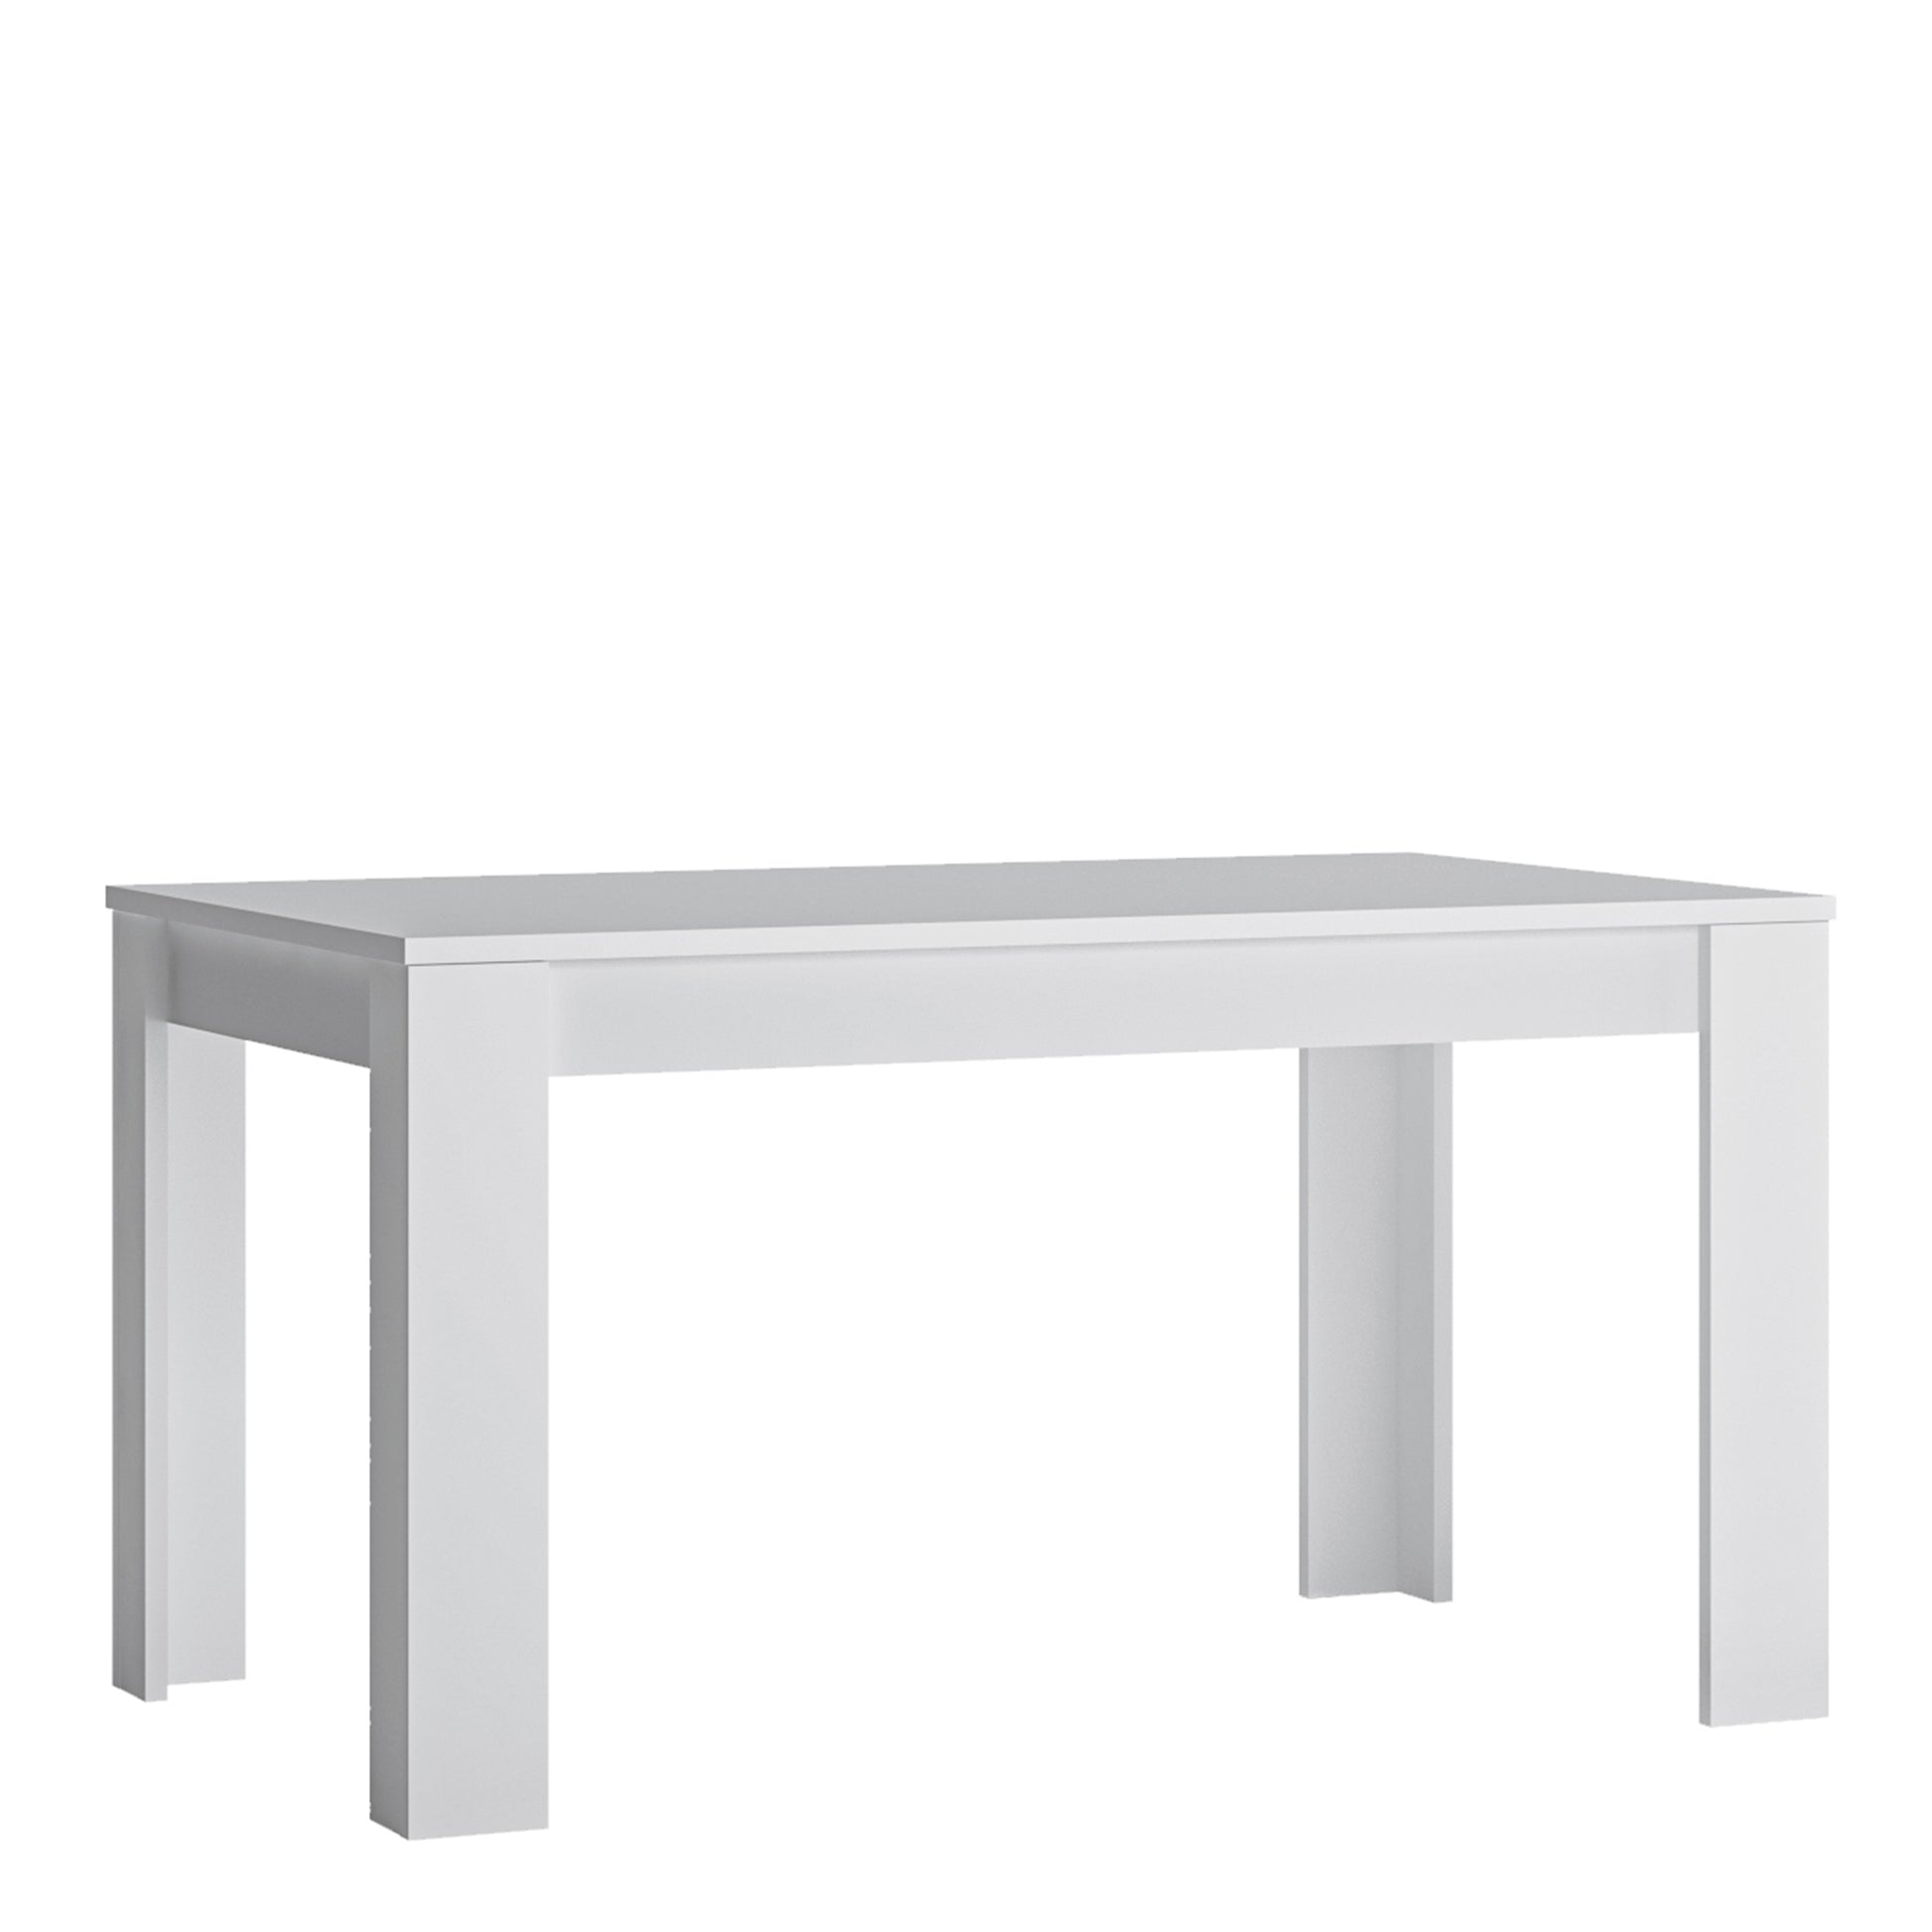 Fribo White Fribo extending dining table 140-180cm in White